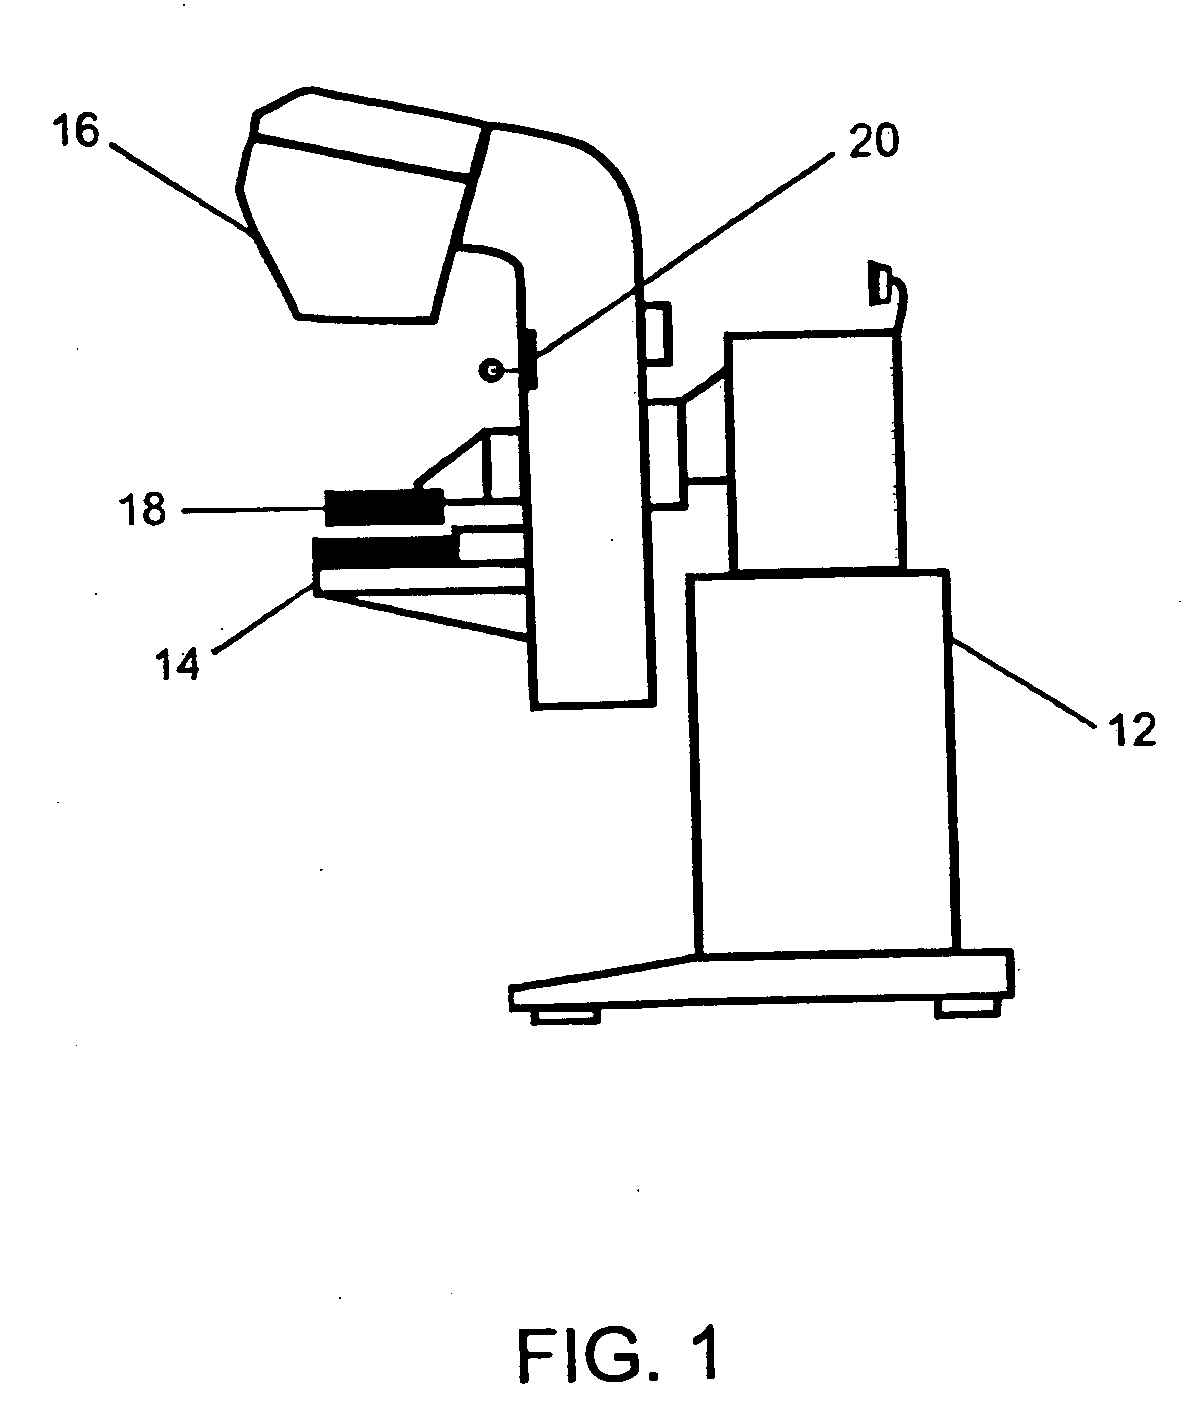 Method and apparatus for determining peripheral breast thickness